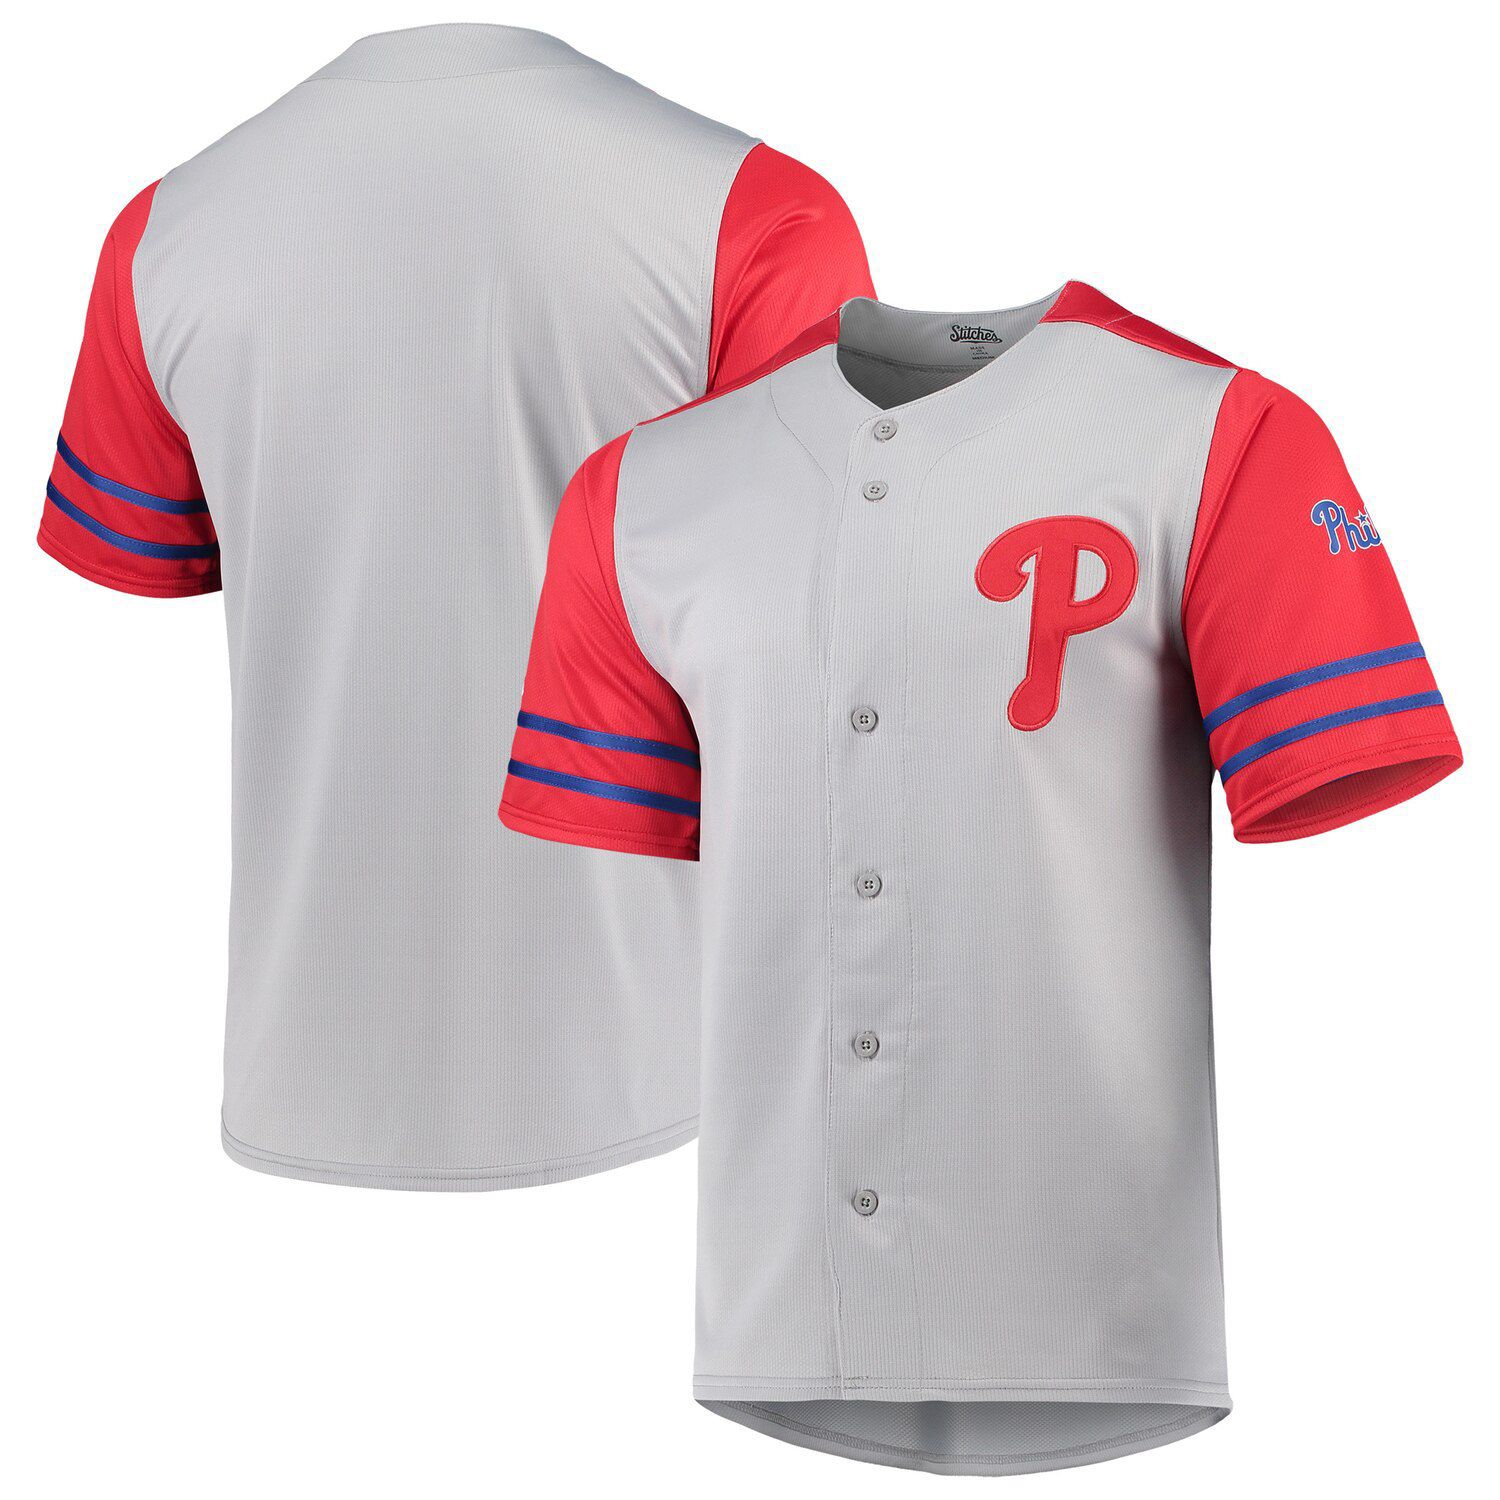 red button up jersey